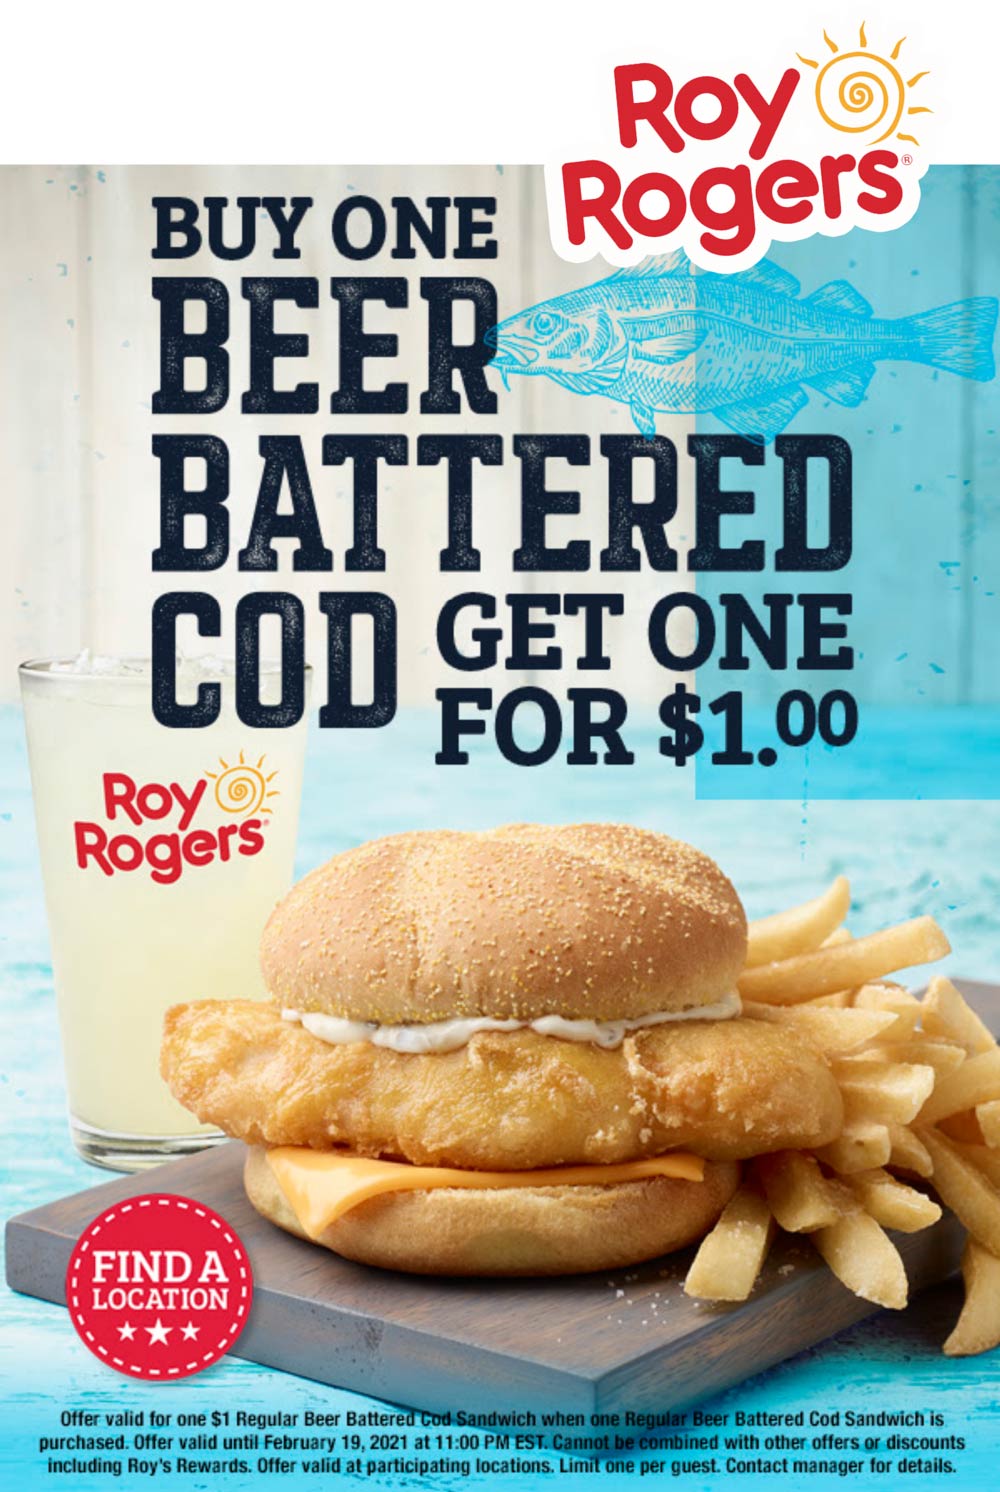 Second beer battered cod sandwich 1 today at Roy Rogers royrogers